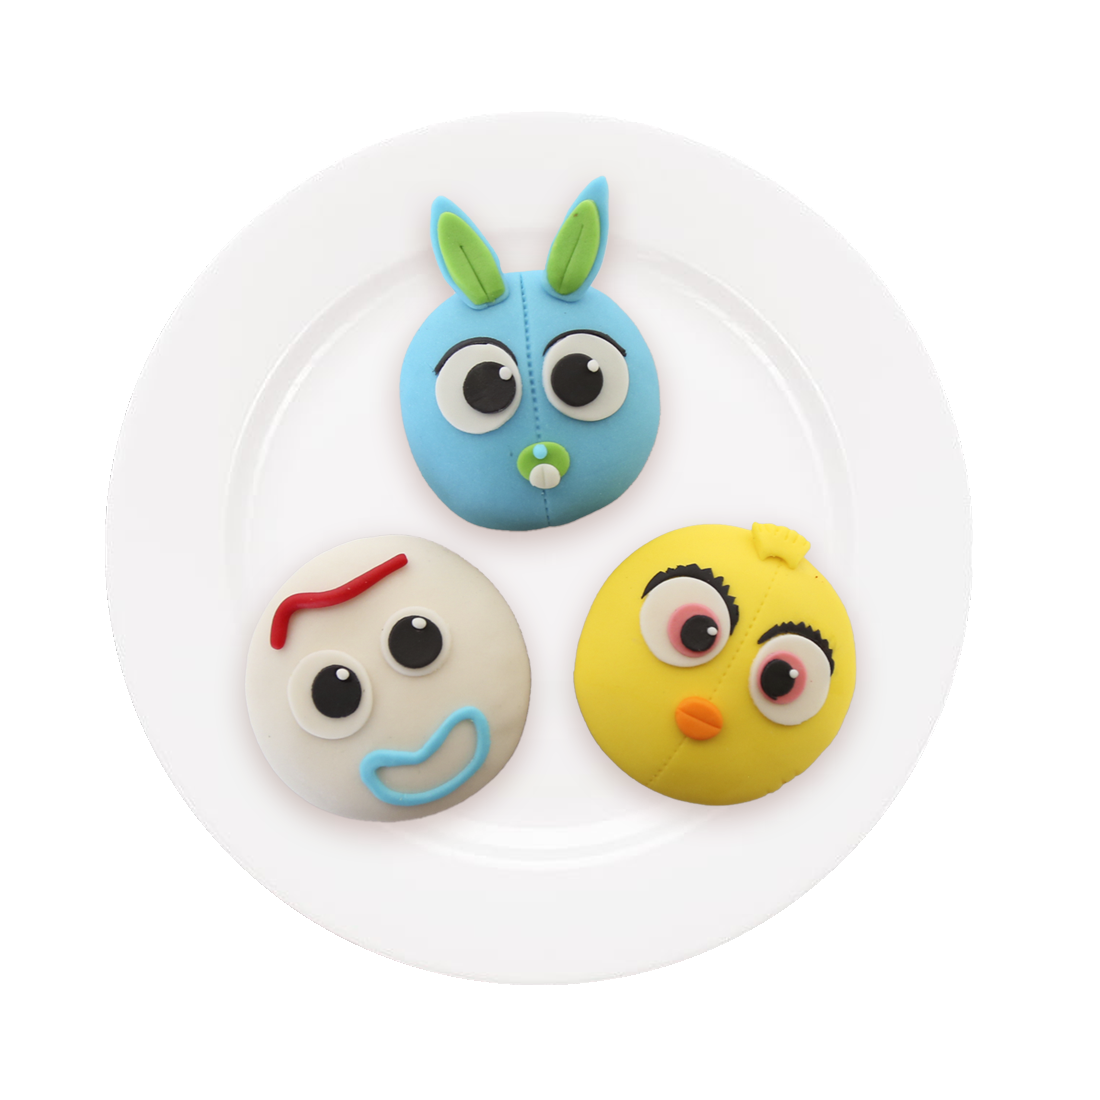 Cupcakes de Toy Story, Forky Bunny Ducky